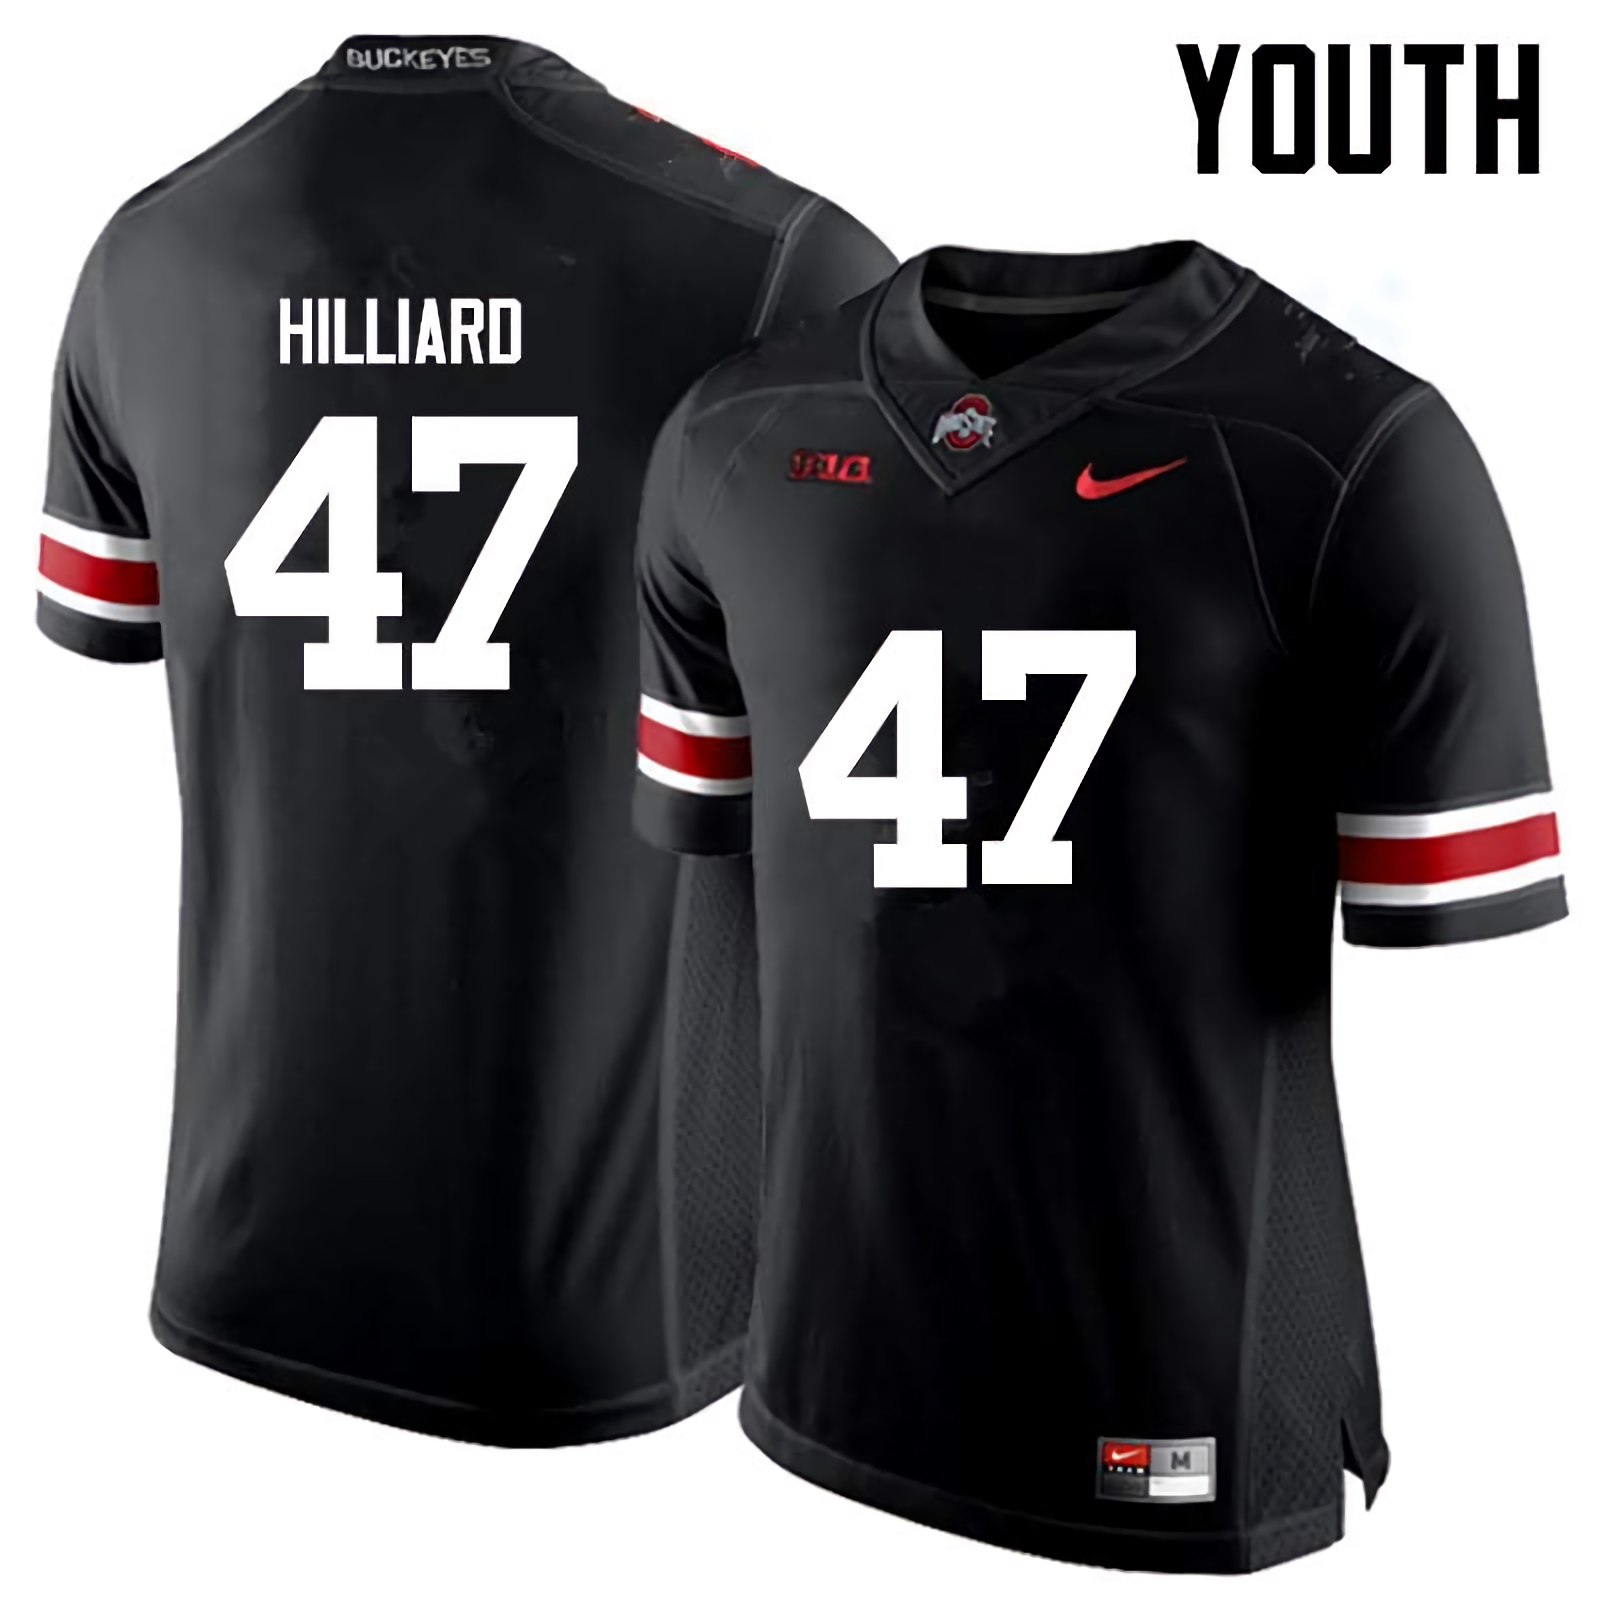 Justin Hilliard Ohio State Buckeyes Youth NCAA #47 Nike Black College Stitched Football Jersey QAI1456RP